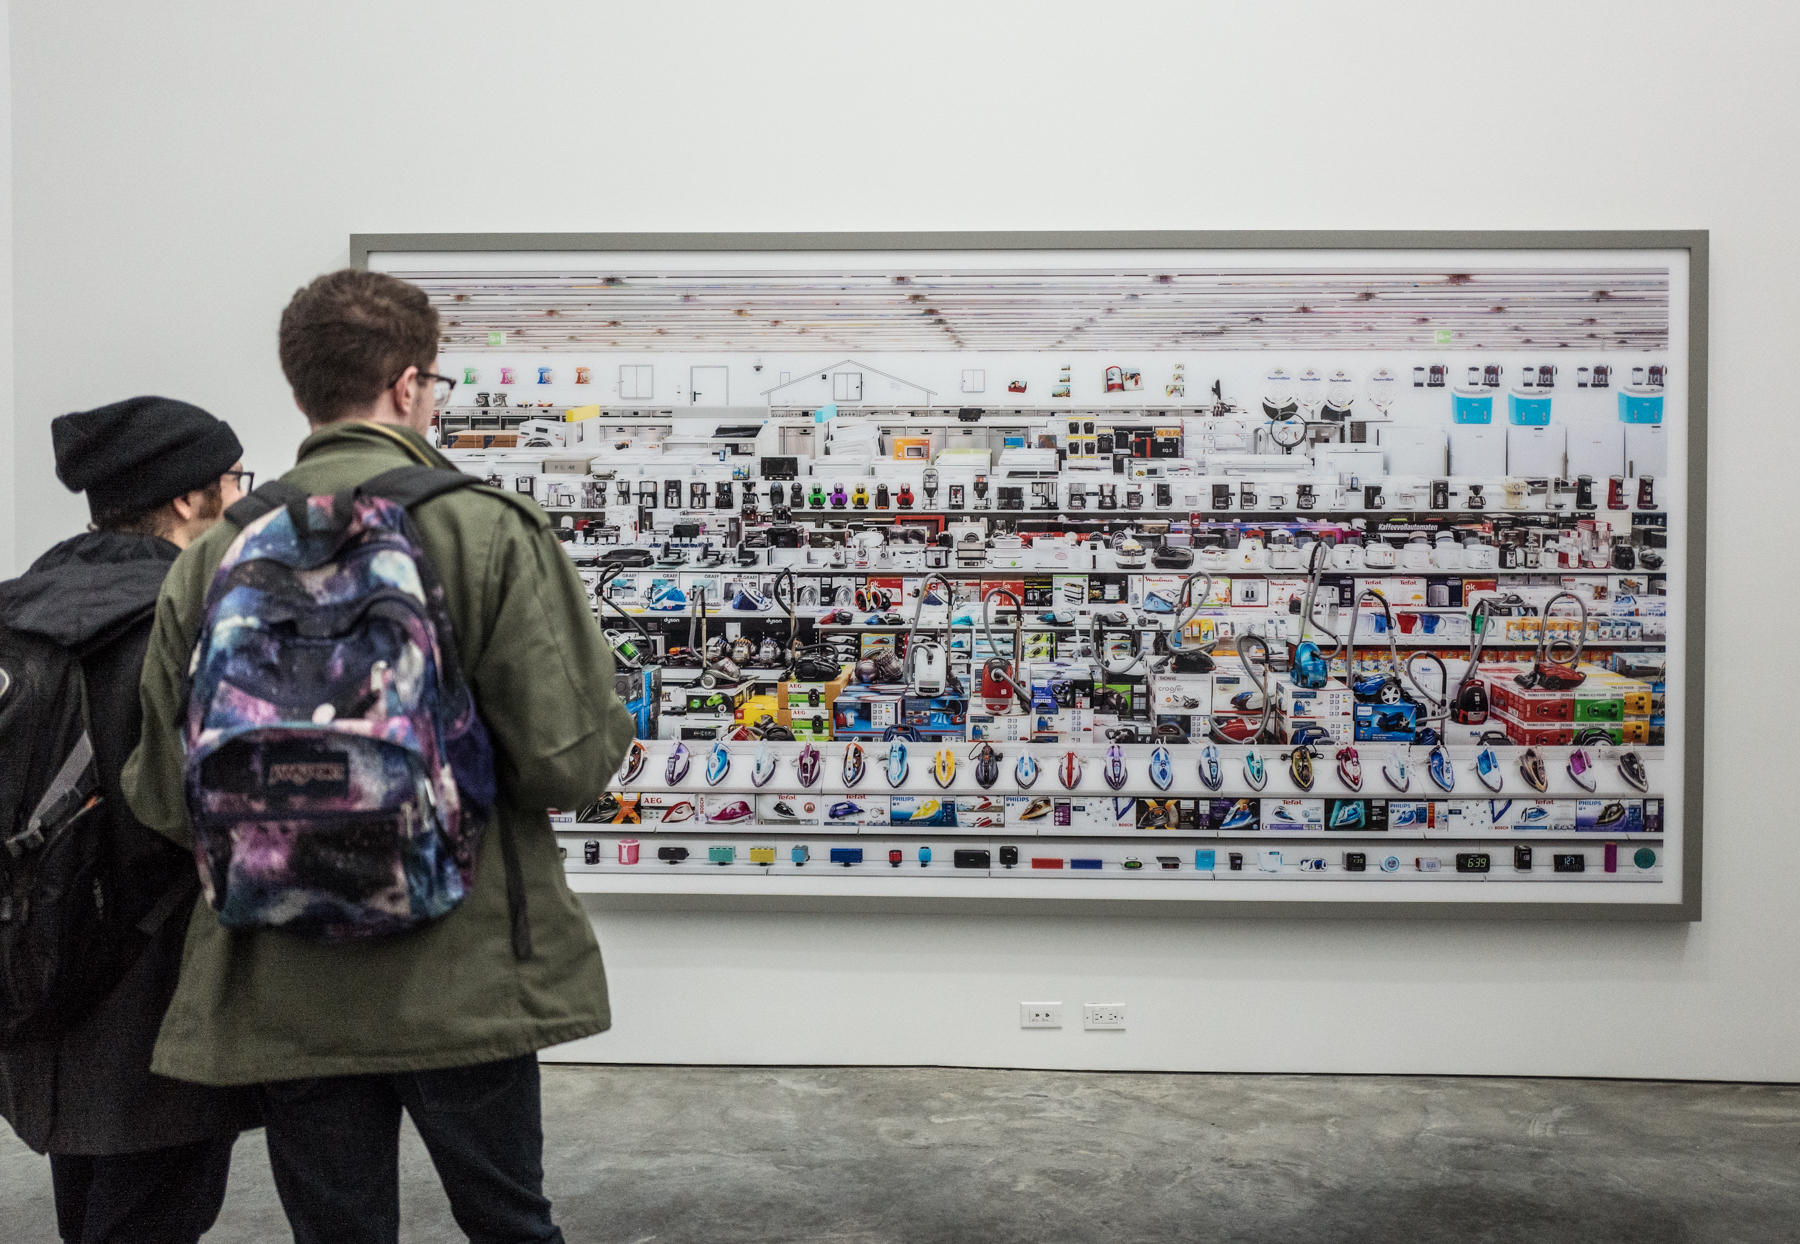 Andreas Gursky at Gagosian Gallery  | Client: Duggal Visual Solutions